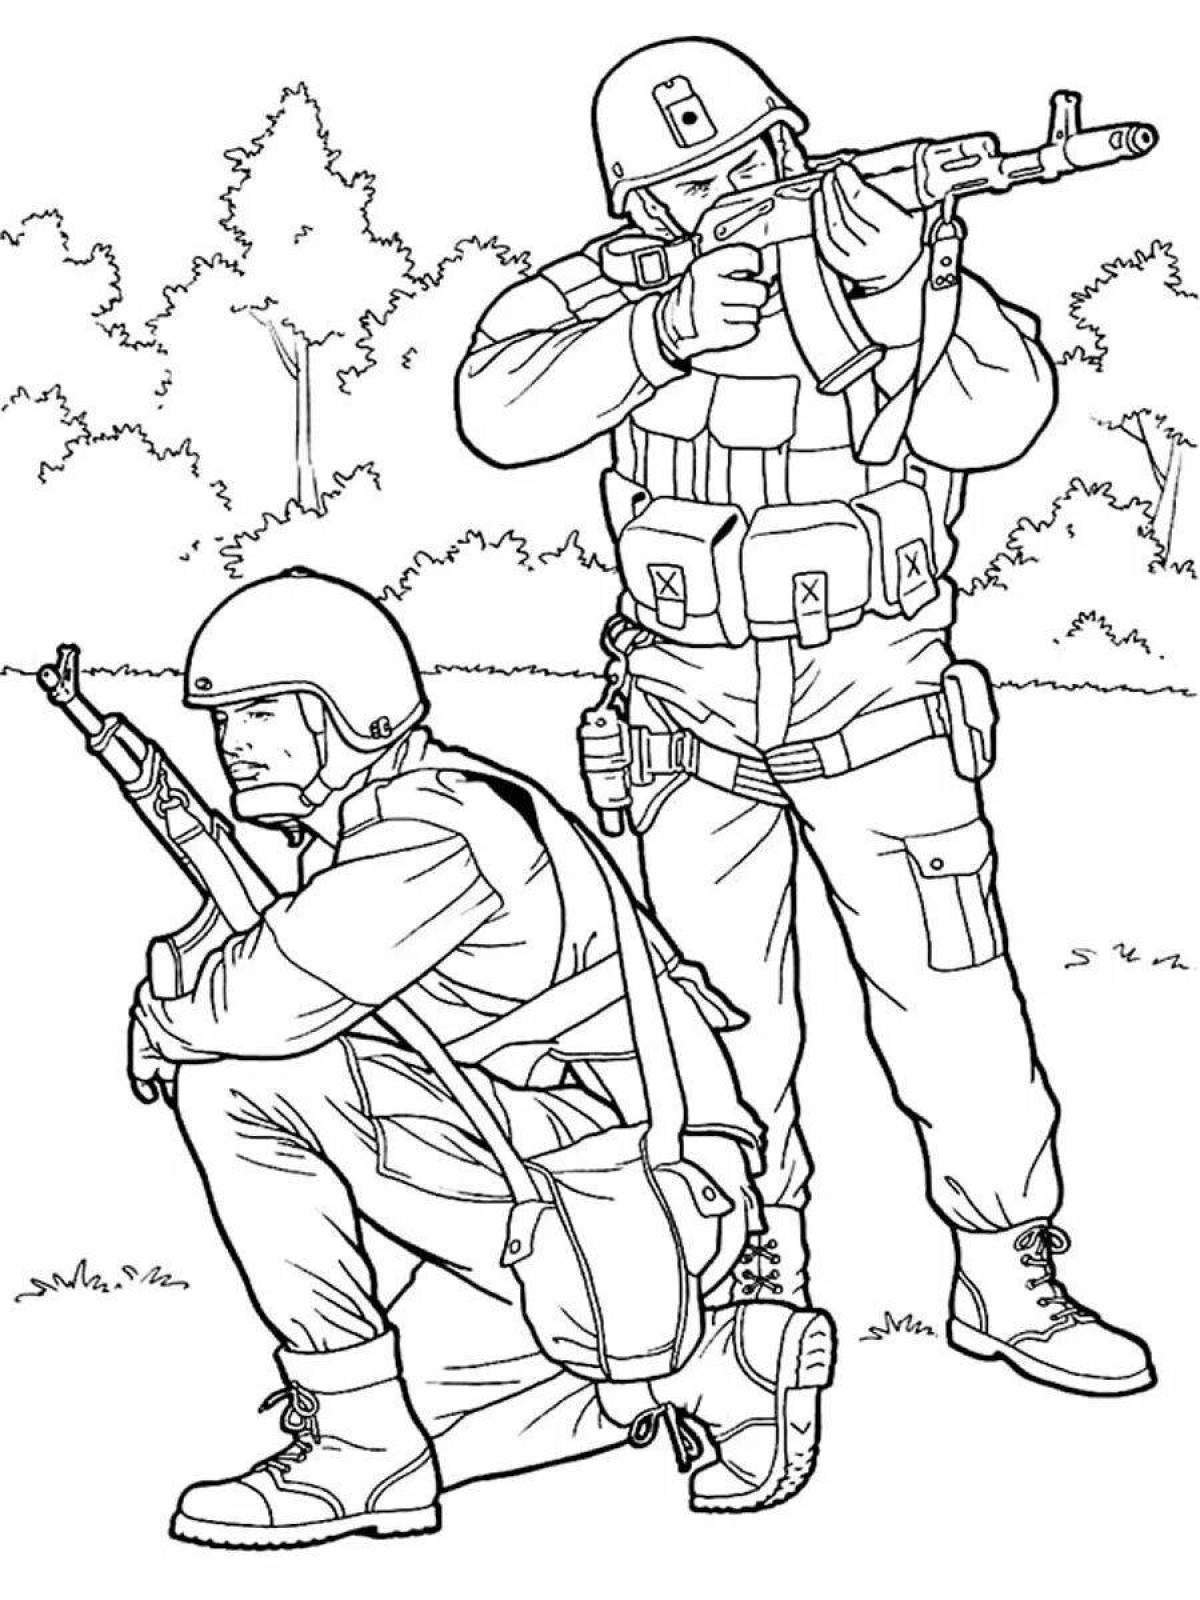 Decisive military coloring pages